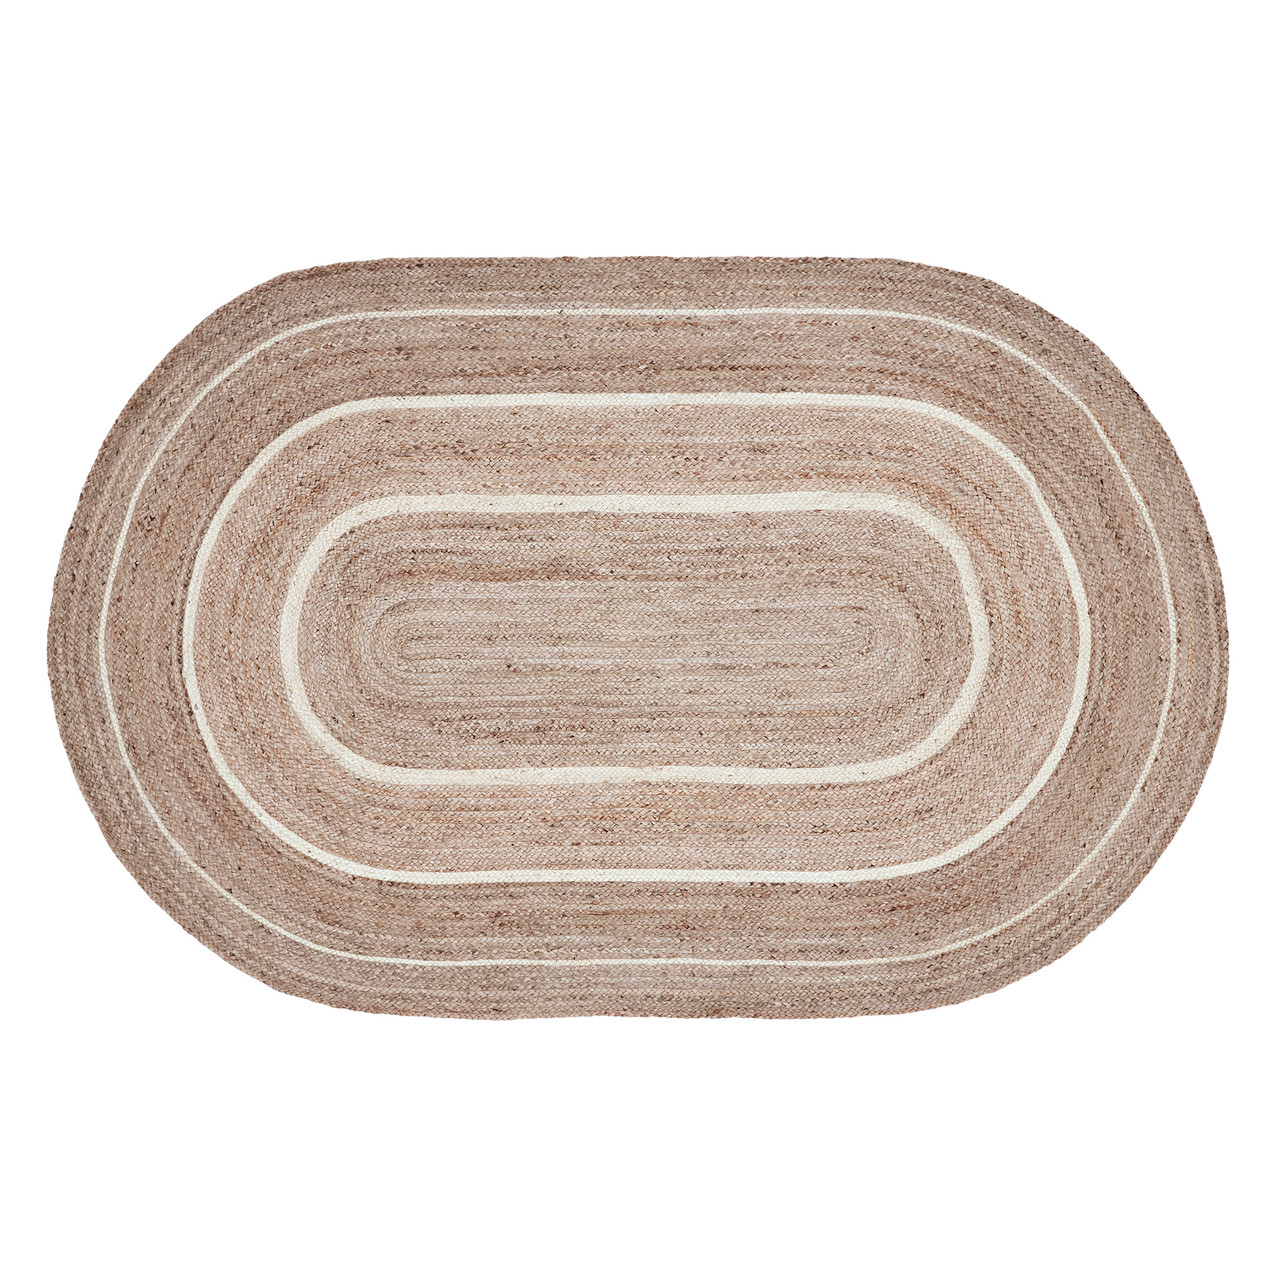 VHC Brands - Kaila Jute Rug Oval with Pad 27x48